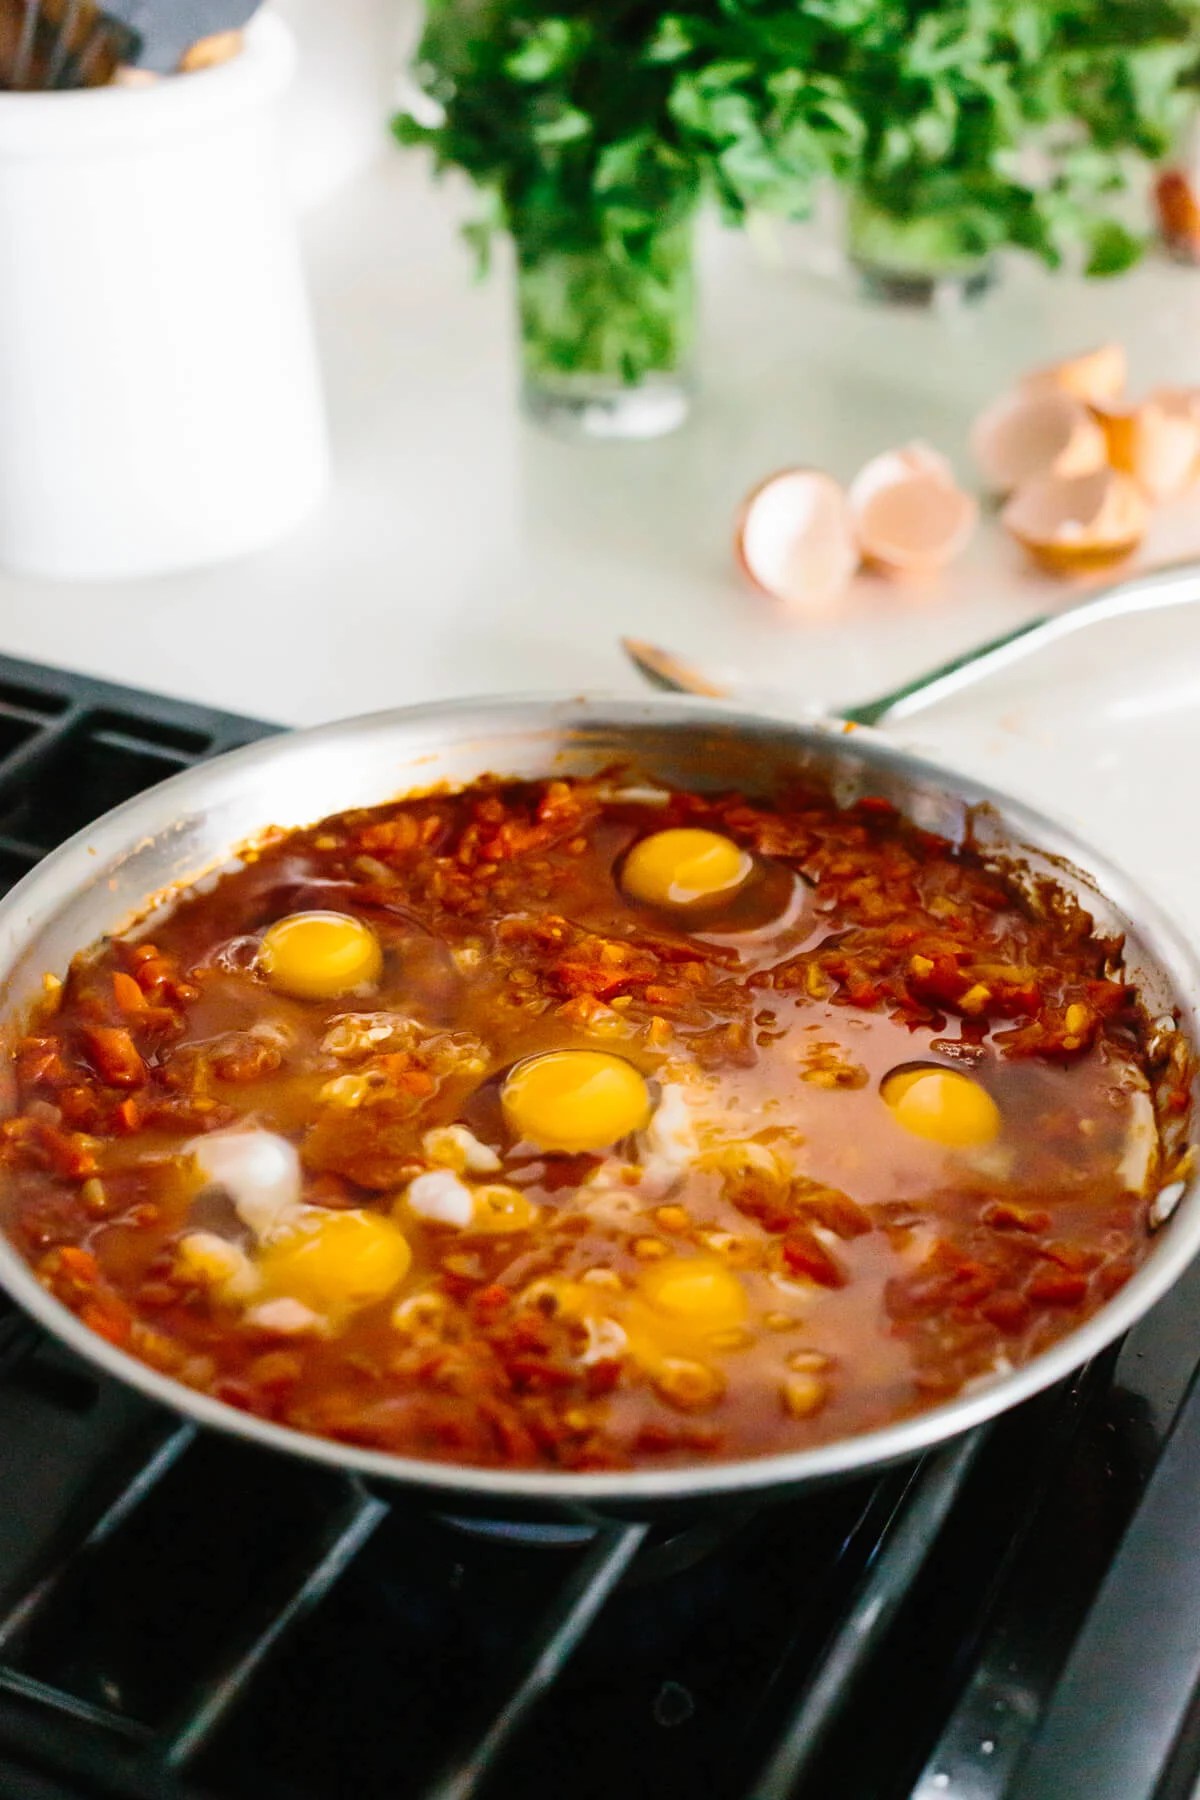 Eggs poaching in spiced tomato mixture.